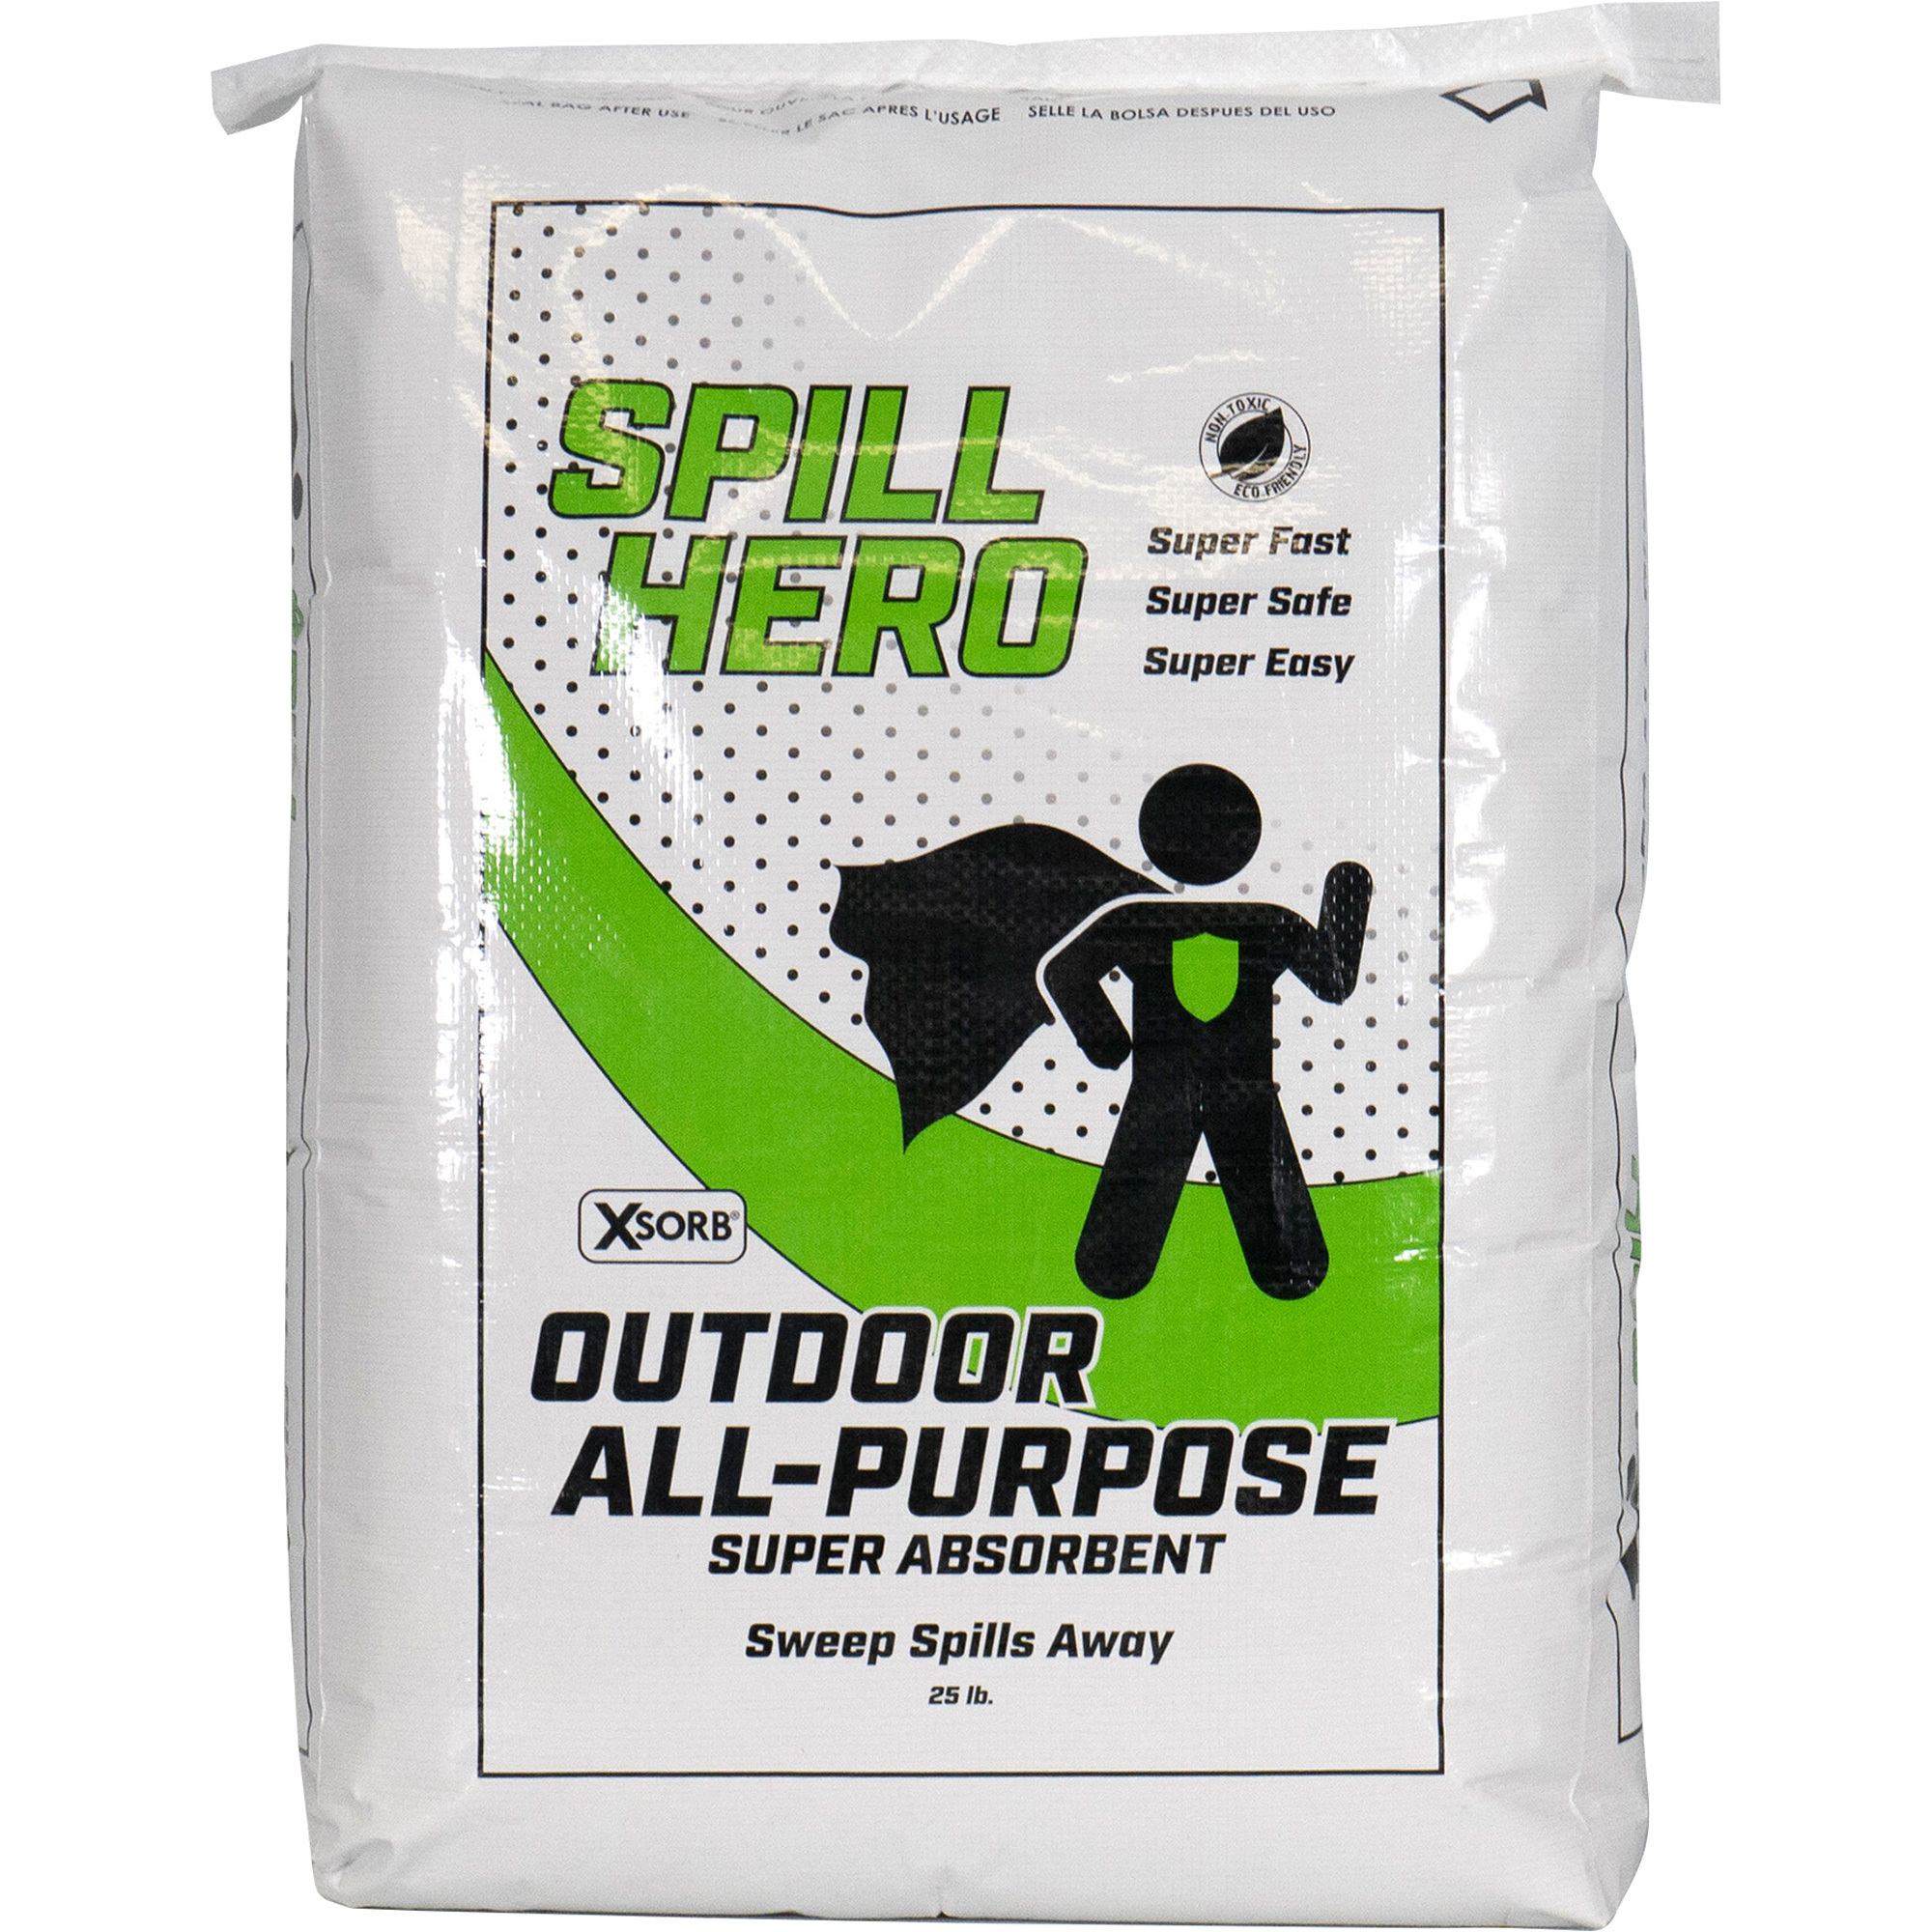 Impact Absorbents XSORB Outdoor All-Purpose Absorbent â 25-Lb. Bag, Model XB25D